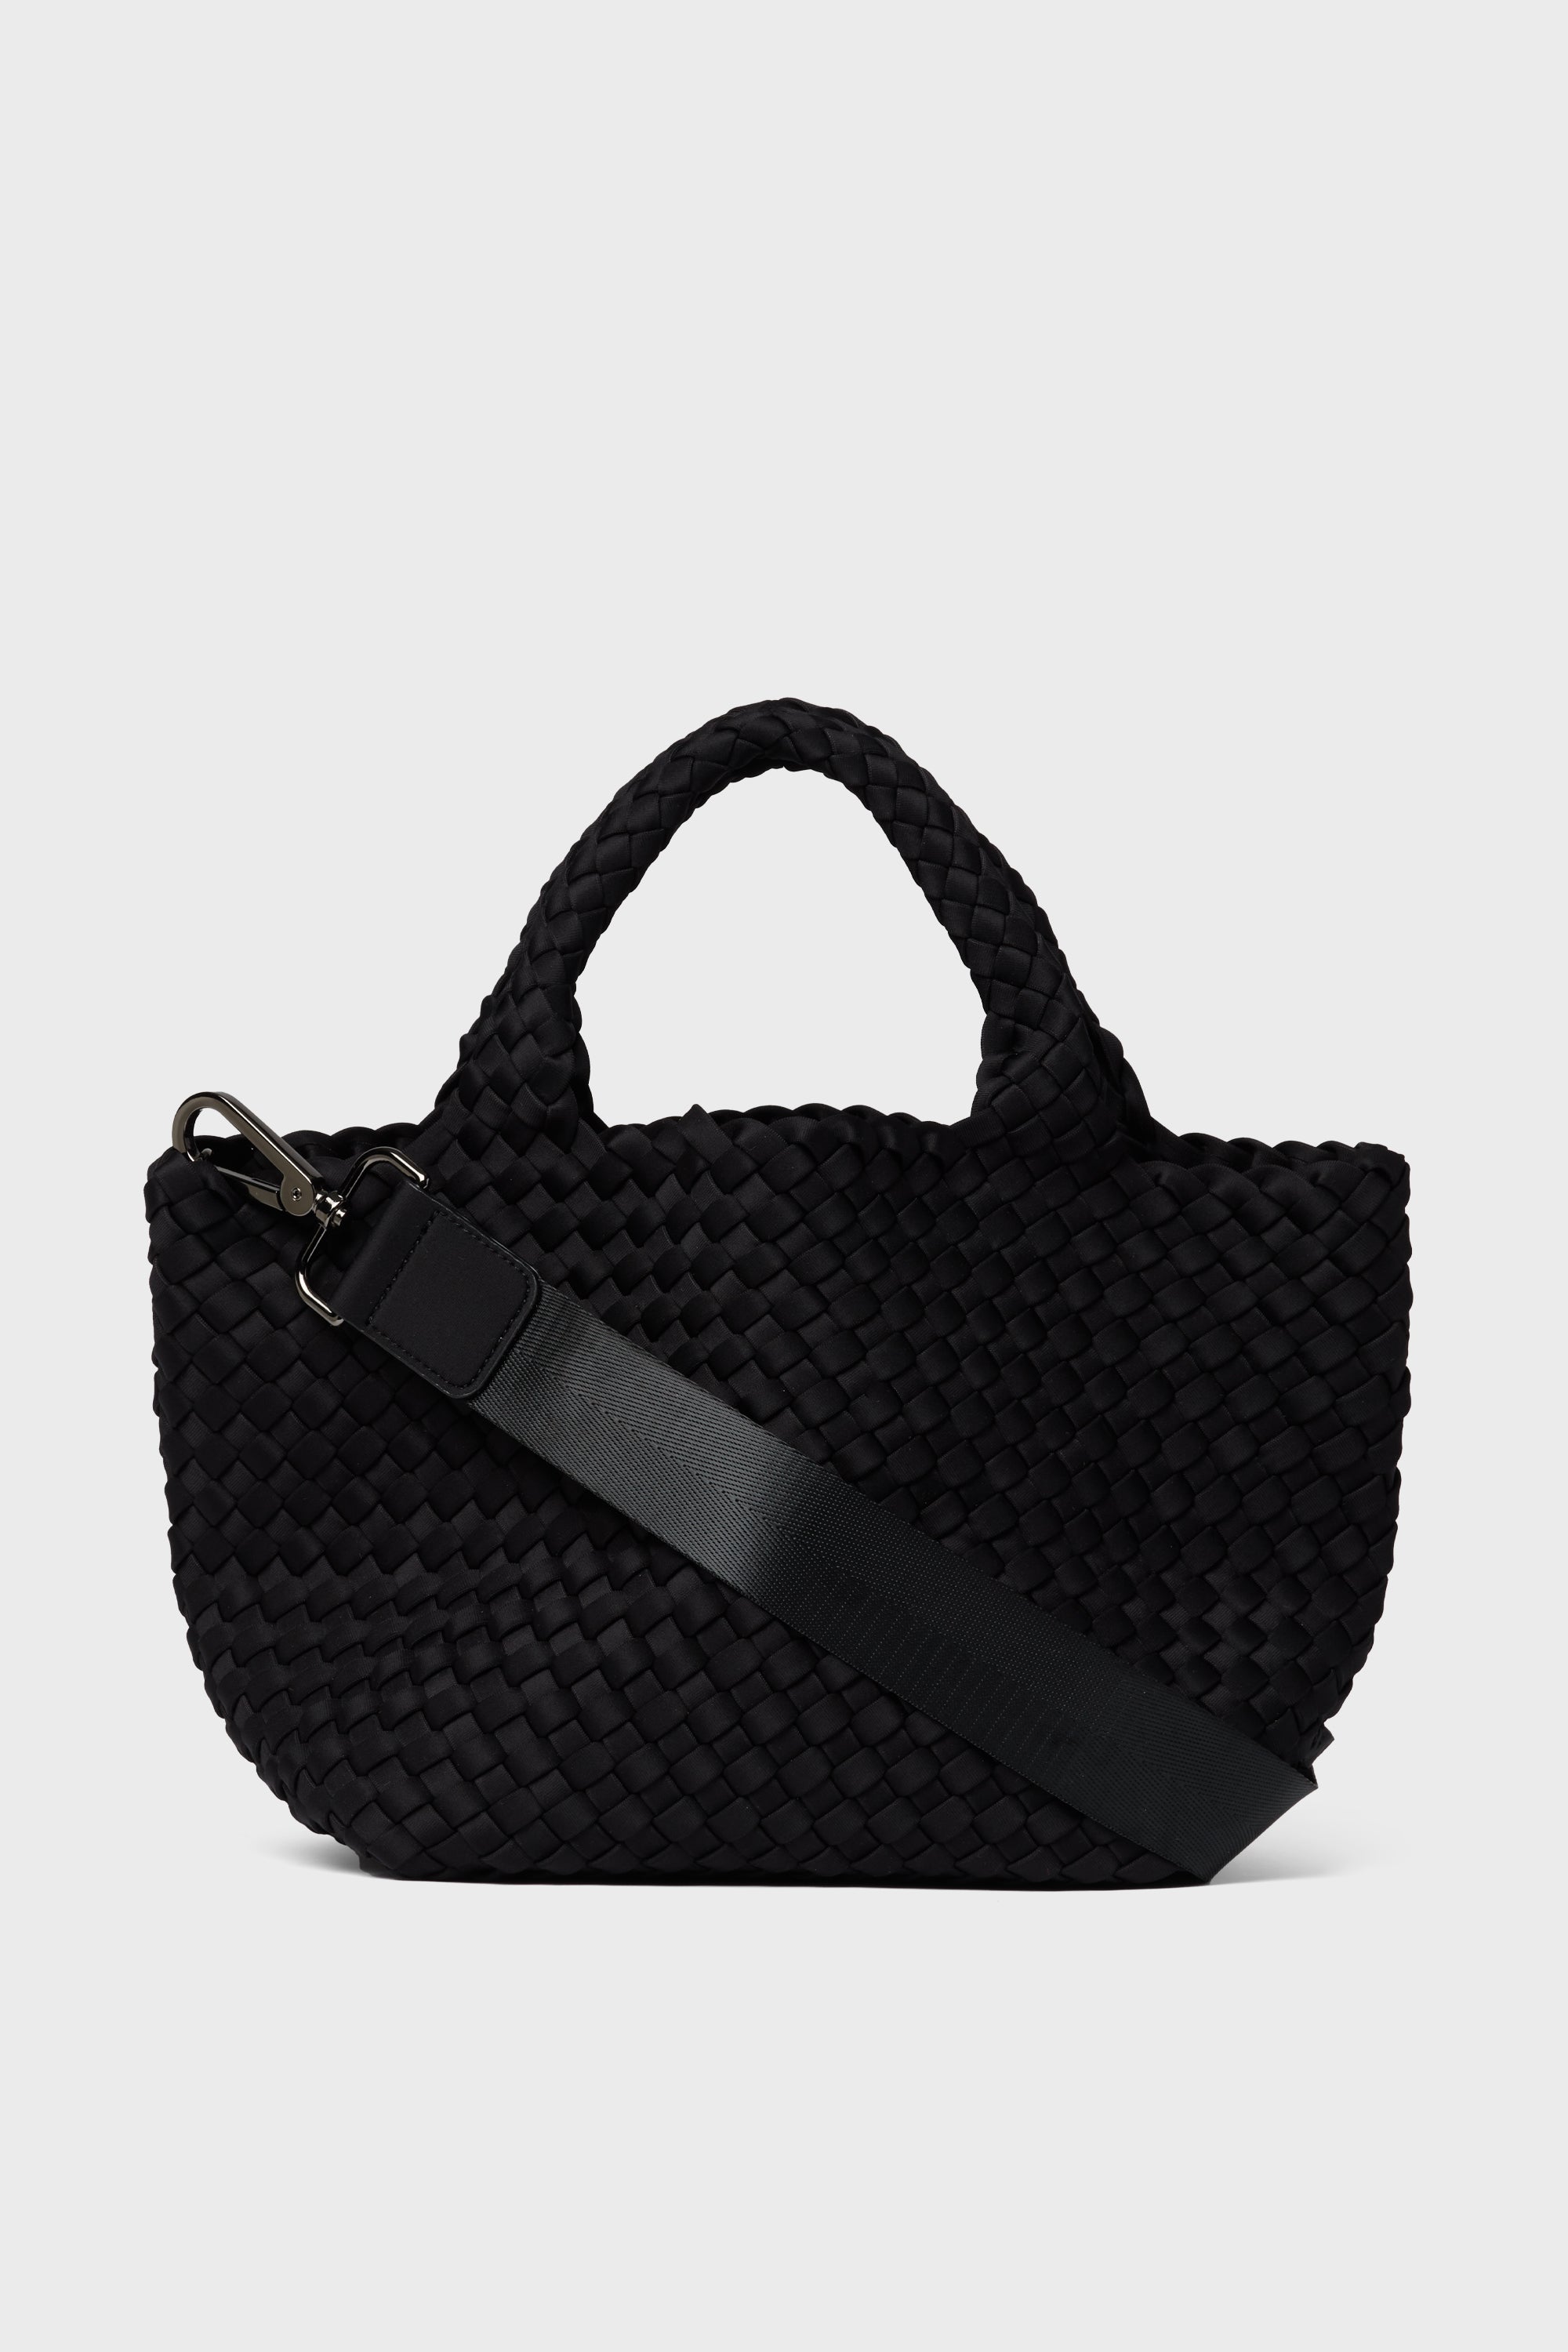 I've finally found my perfect purse!!! And its fits everything i could, clare  v moyen messenger bag